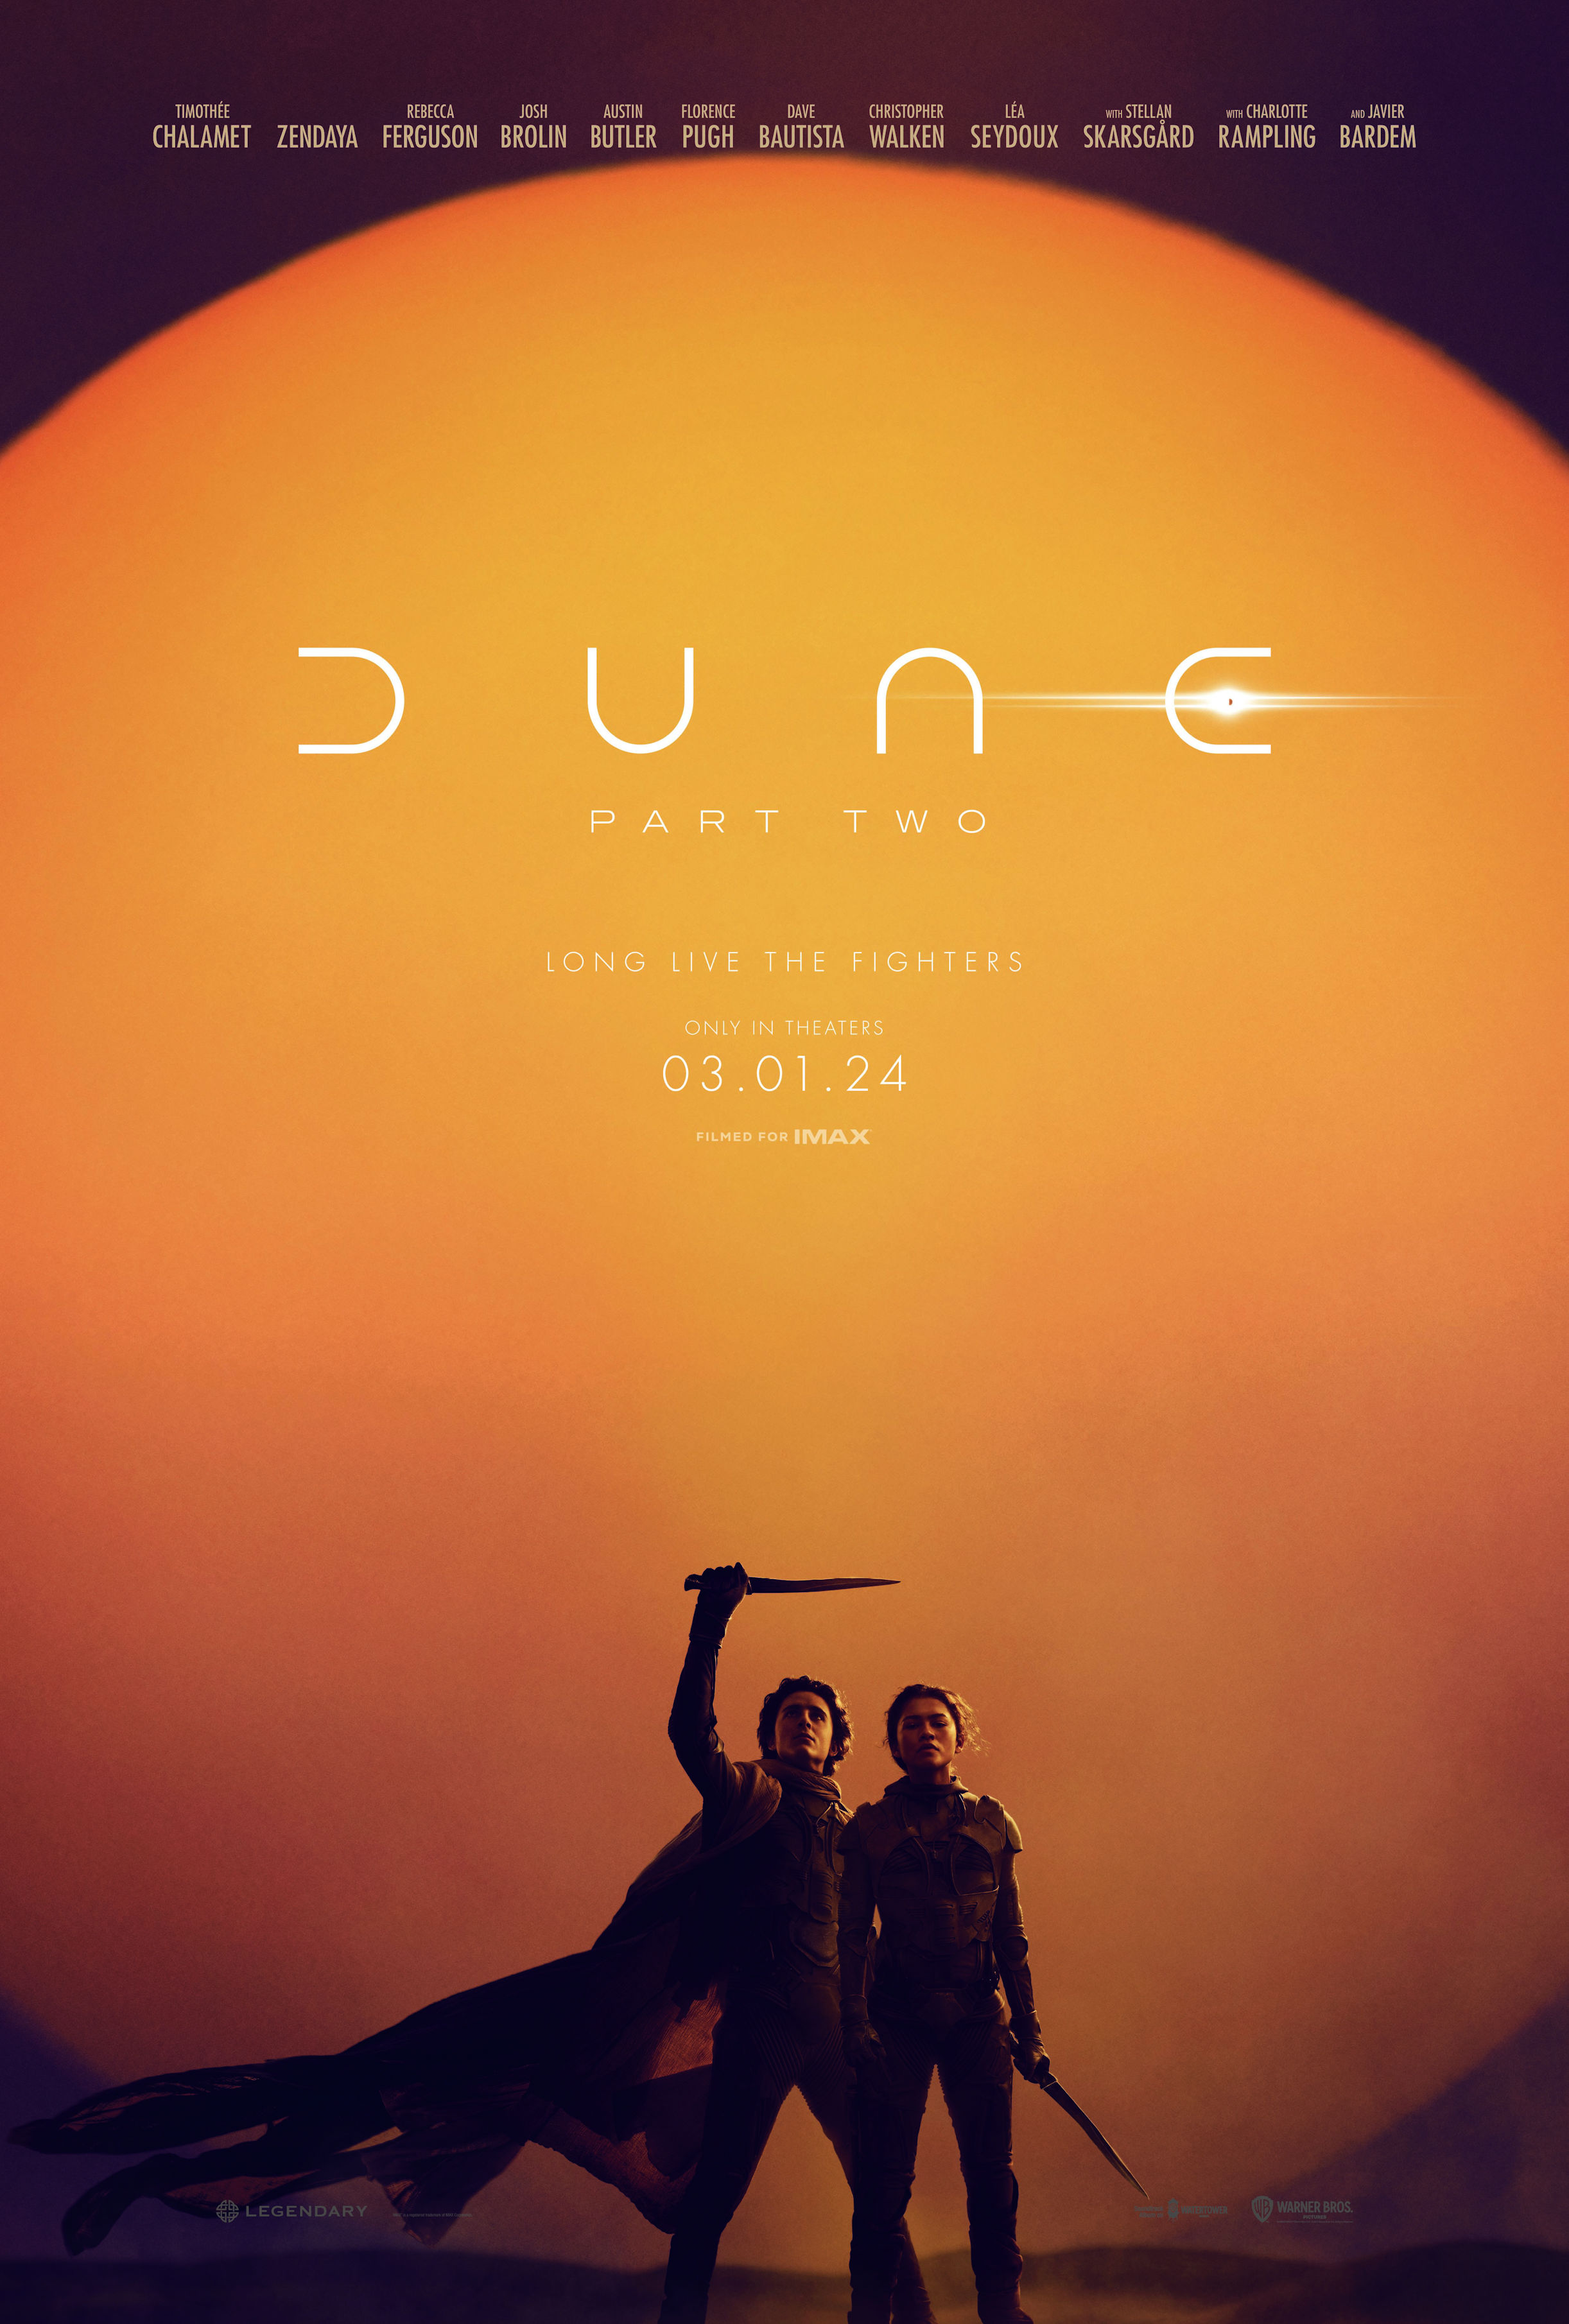 <p>No surprise here! "Dune: Part Two" isn't just one of the best films of the year, the rare case of a sequel that's better than its predecessor or one of the best sci-fi films to grace the silver screen. It's one of the best films ever, period. It banked more than $685M at the box office and scored a 93% fresh rating with critics on Rotten Tomatoes. A third installment in the Timothee Chalamet and <a href="https://www.wonderwall.com/celebrity/profiles/overview/zendaya-1555.article">Zendaya</a>-led sci-fi series is currently in the works. And we can't wait!</p>